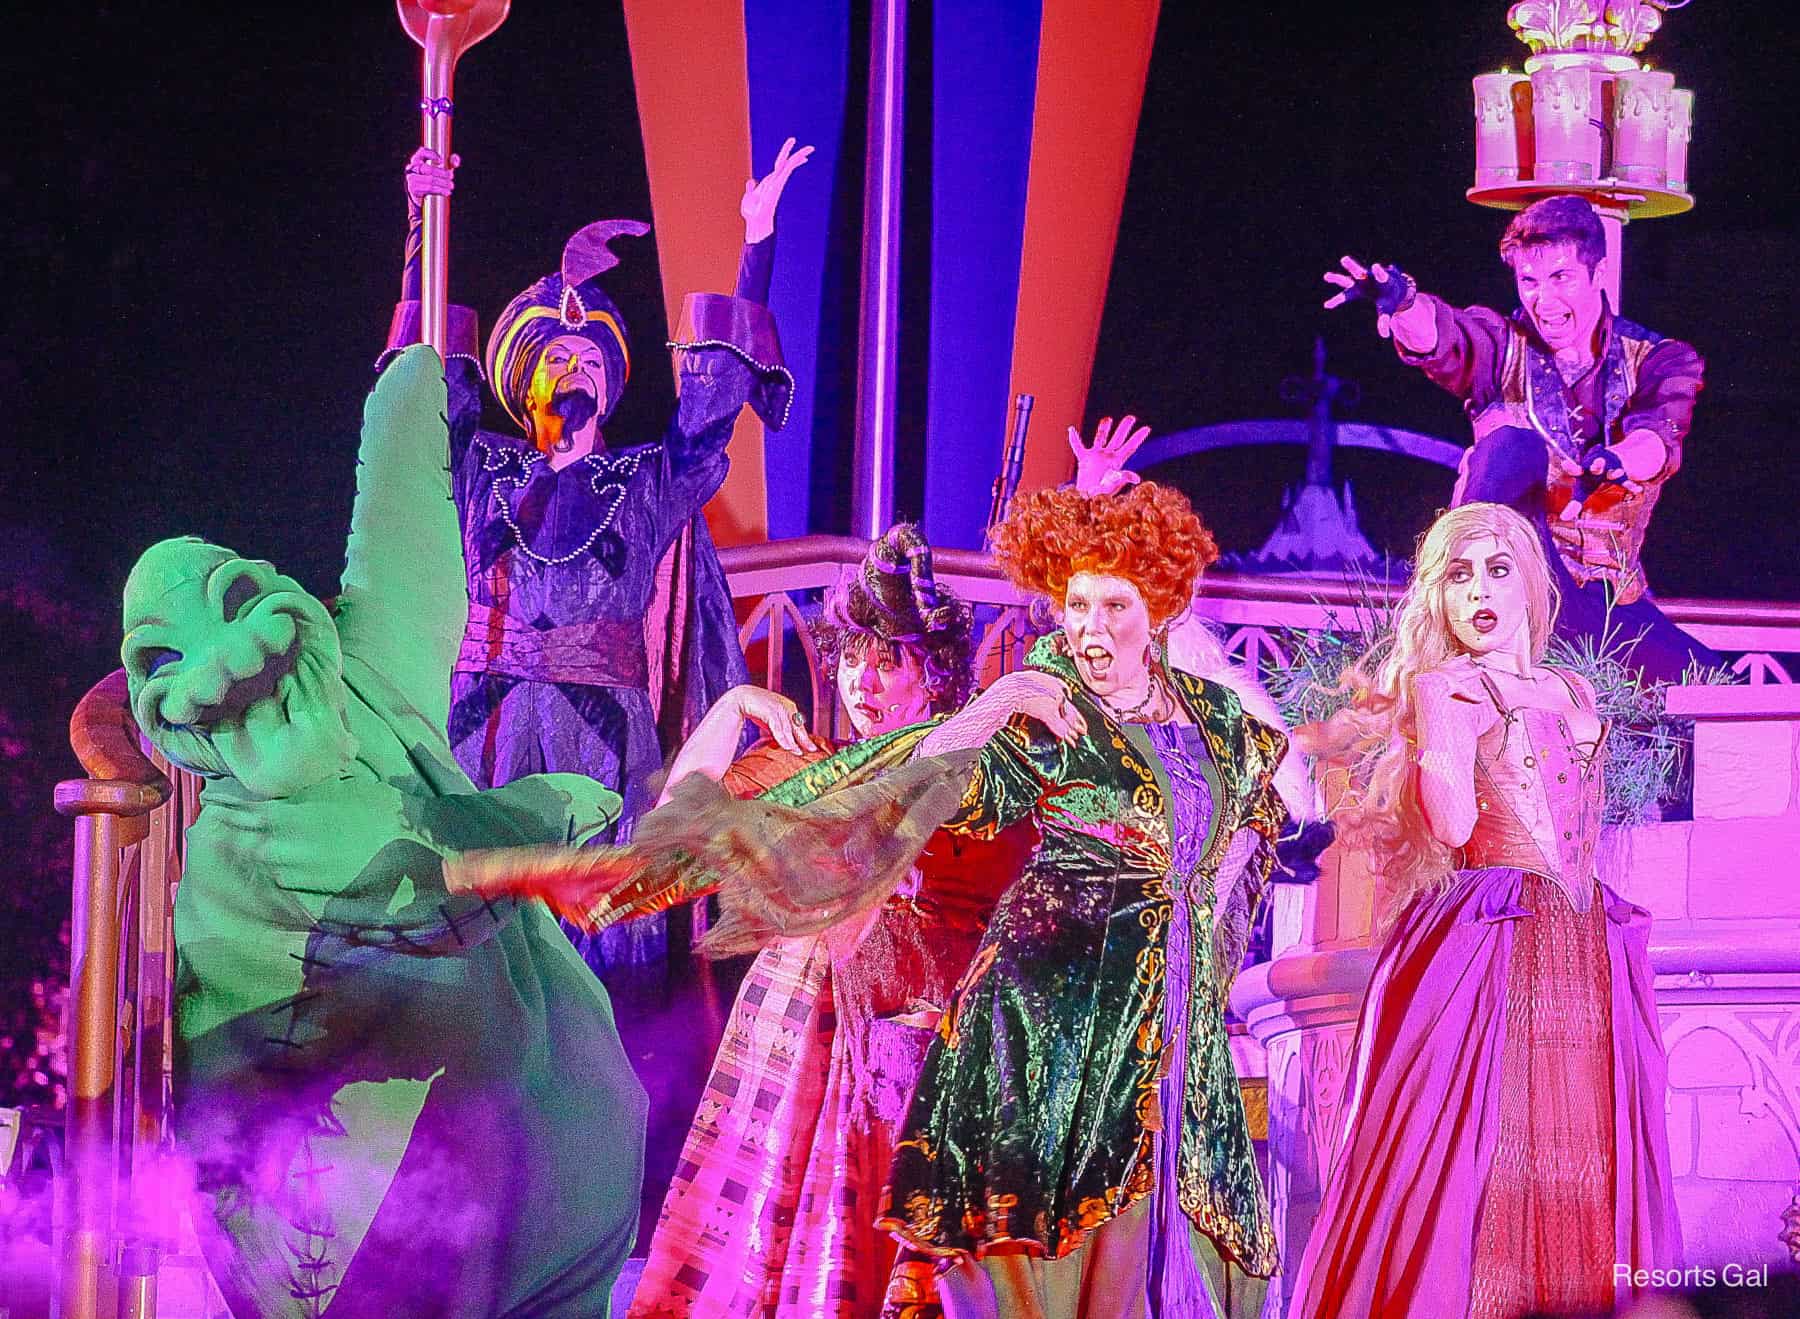 Oogie Boogie and the Sanderson Sisters performing on stage during the Villains Spelltacular at Mickey's Not So Scary Halloween Party 